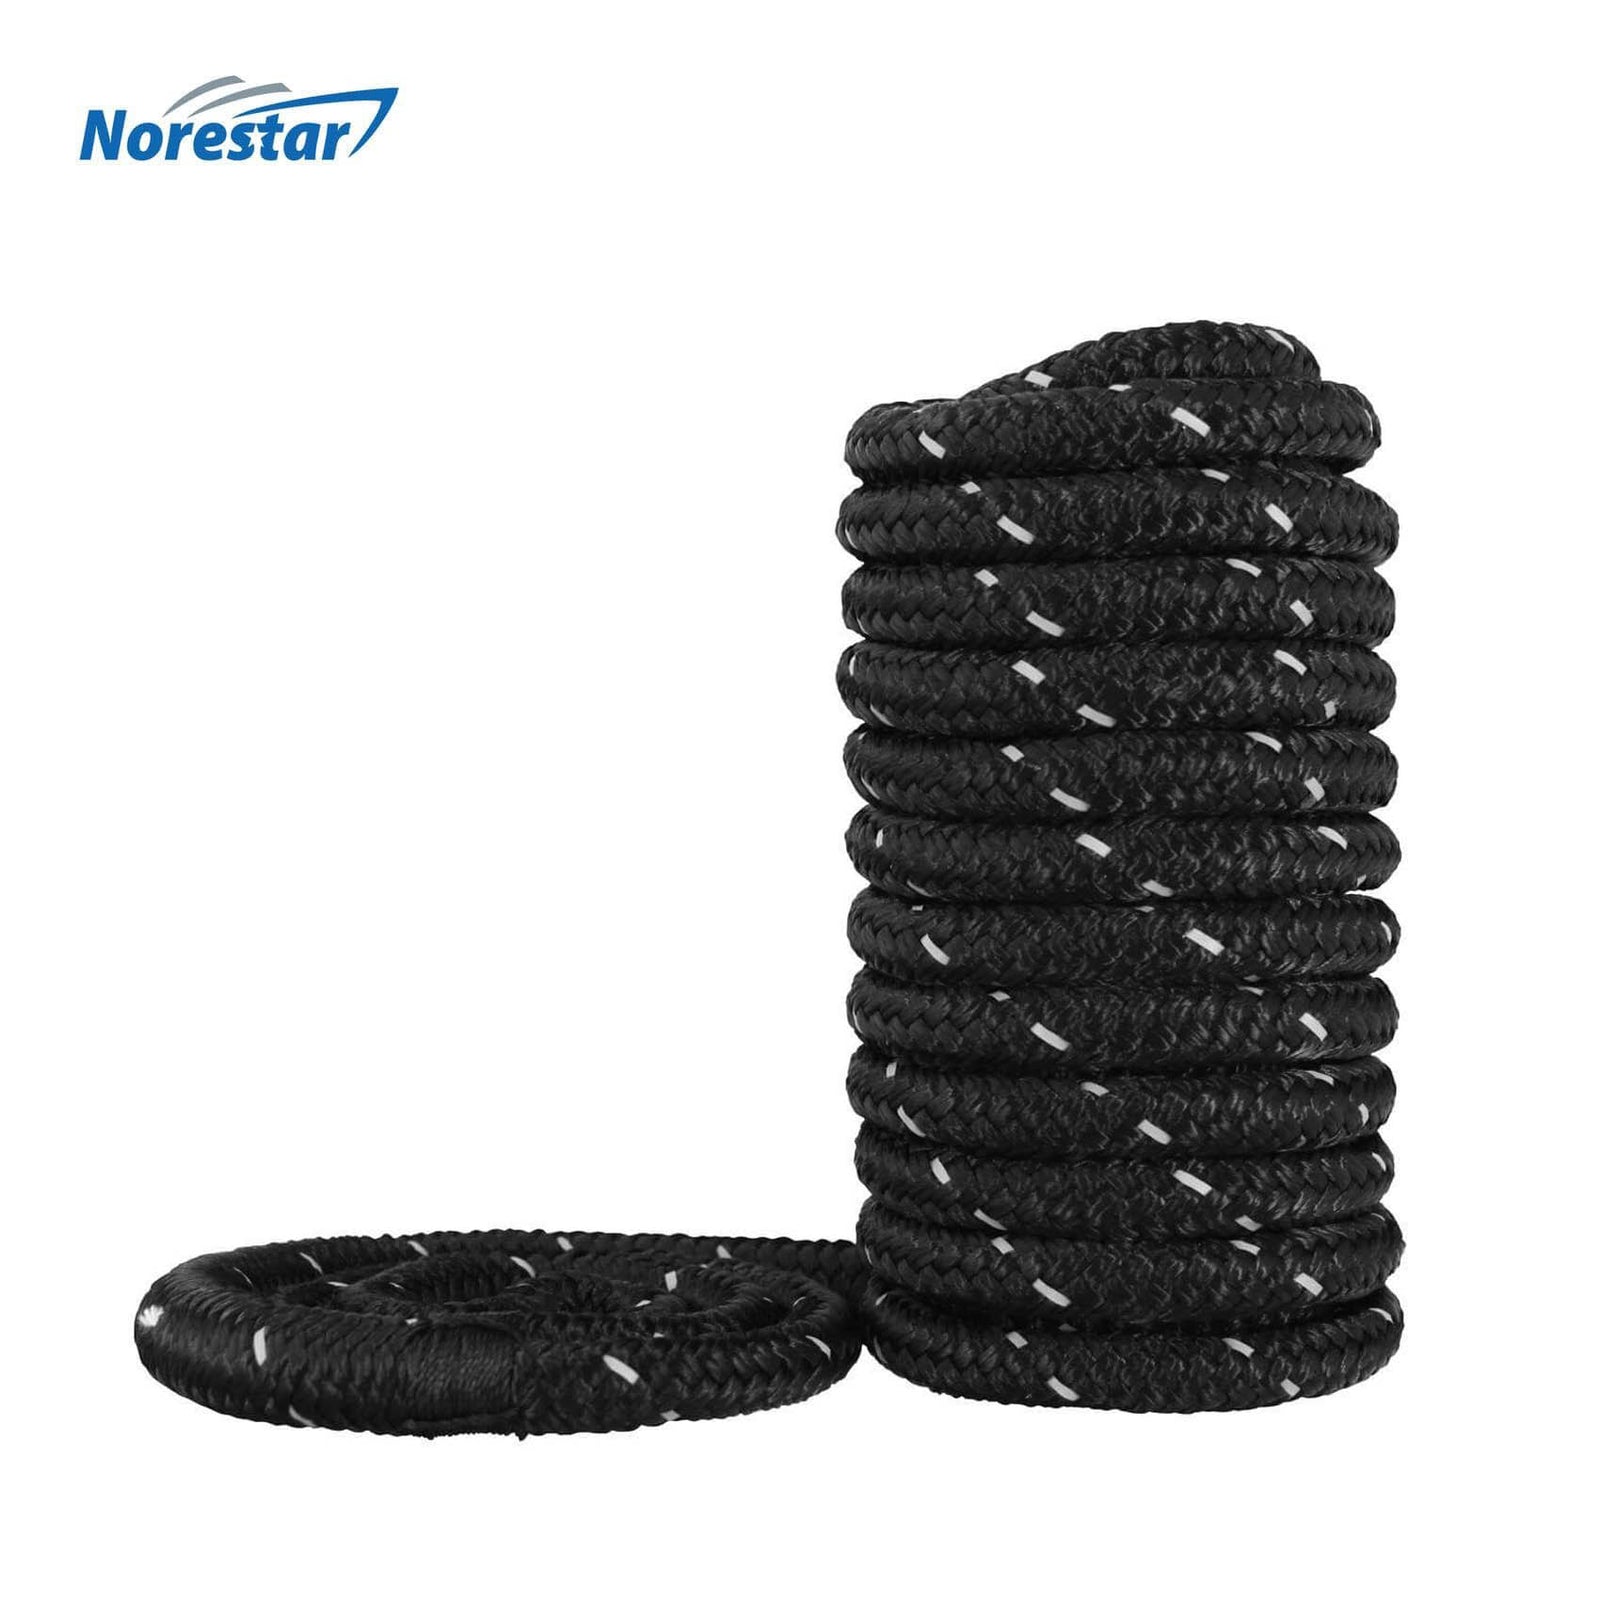 Norestar High-Visibility Reflective Double-Braided Nylon Dock Line, Black –